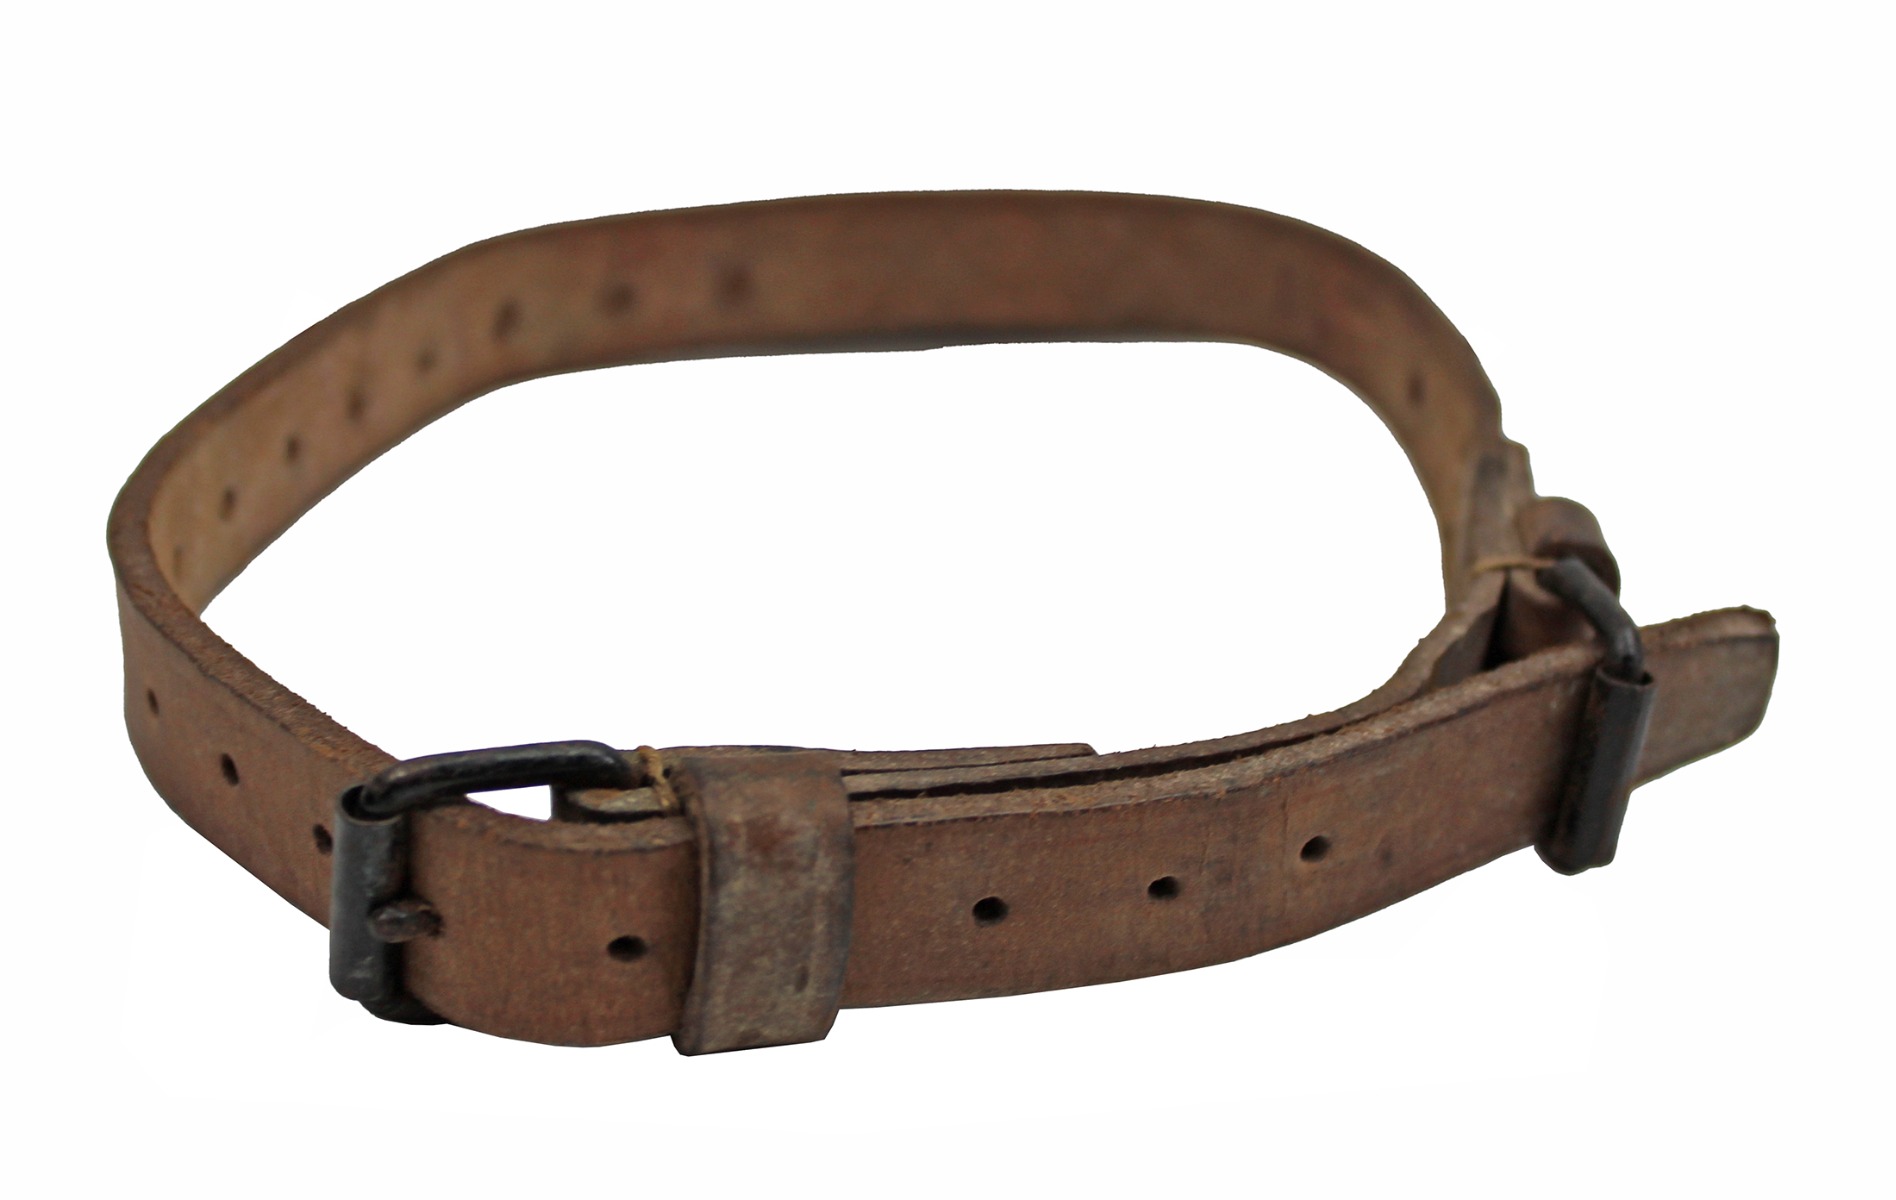 VINTAGE EUROPEAN UTILITY STRAP WITH 2 BUCKLES 